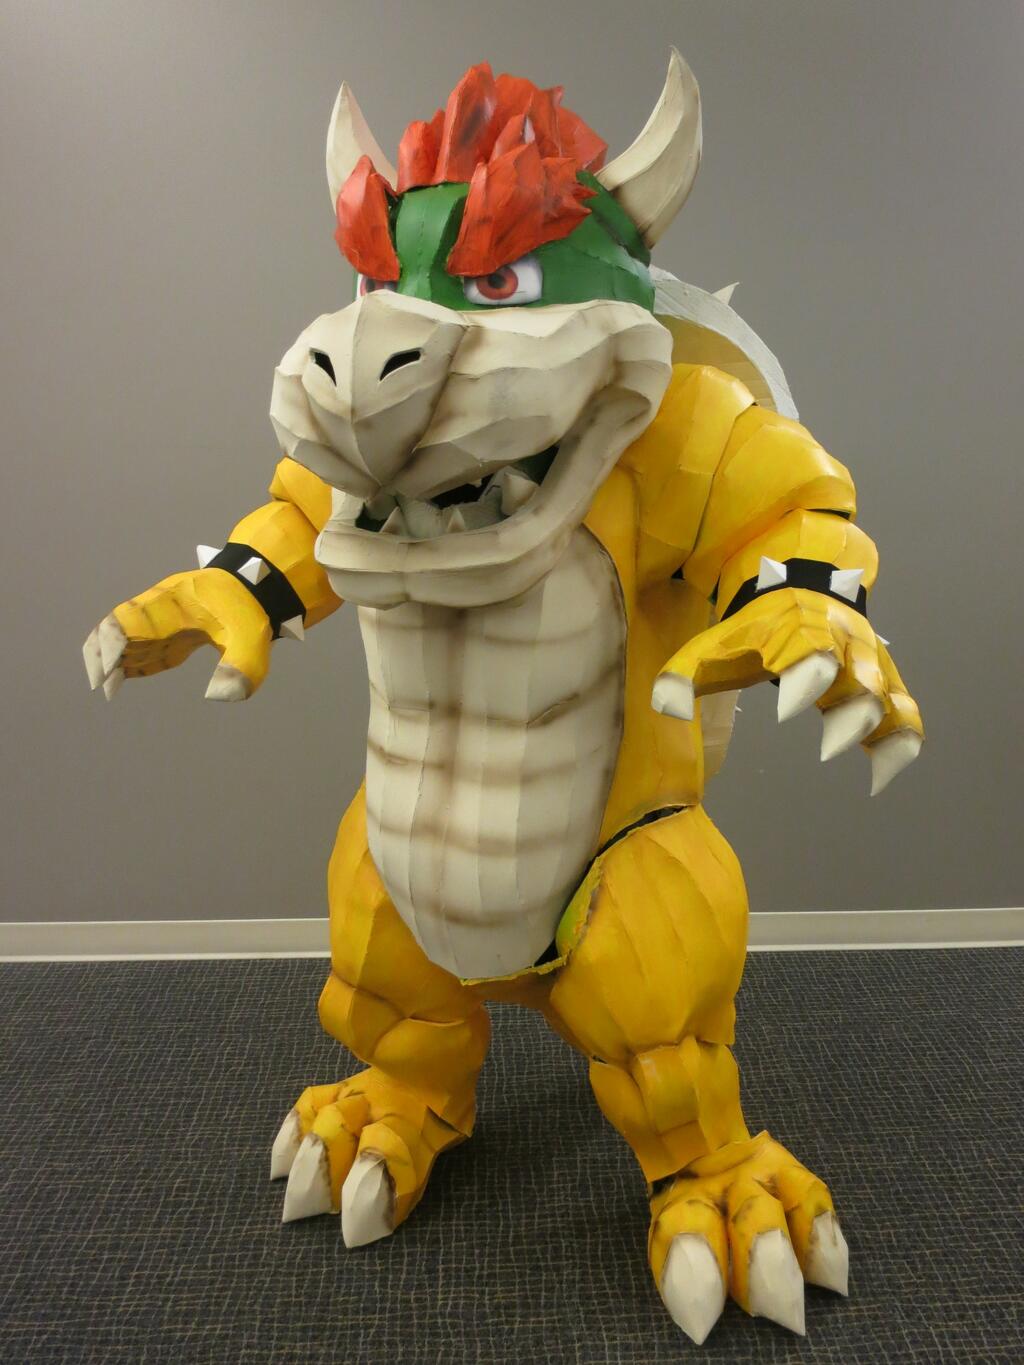 Bowser Makes For An Incredible Halloween Costume